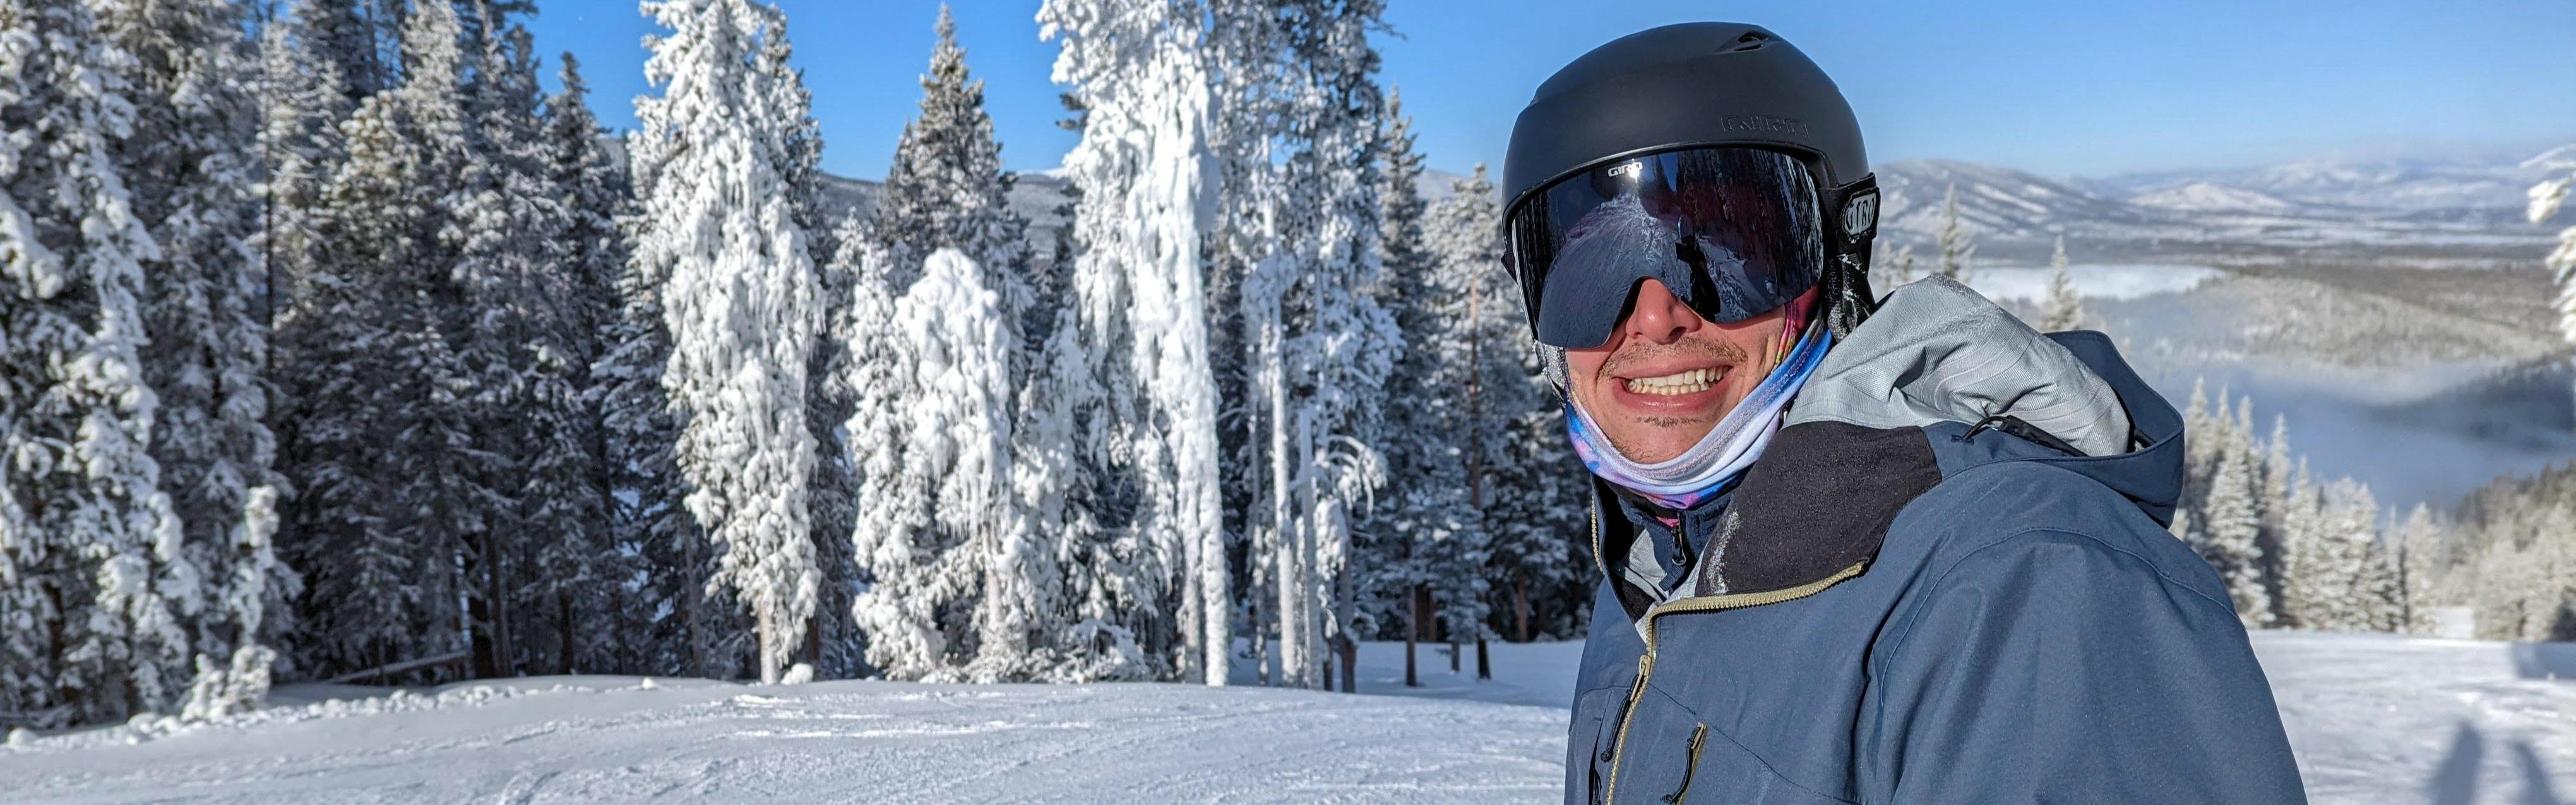 A skier smiling at the camera wearing the Giro Grid MIPS Helmet.